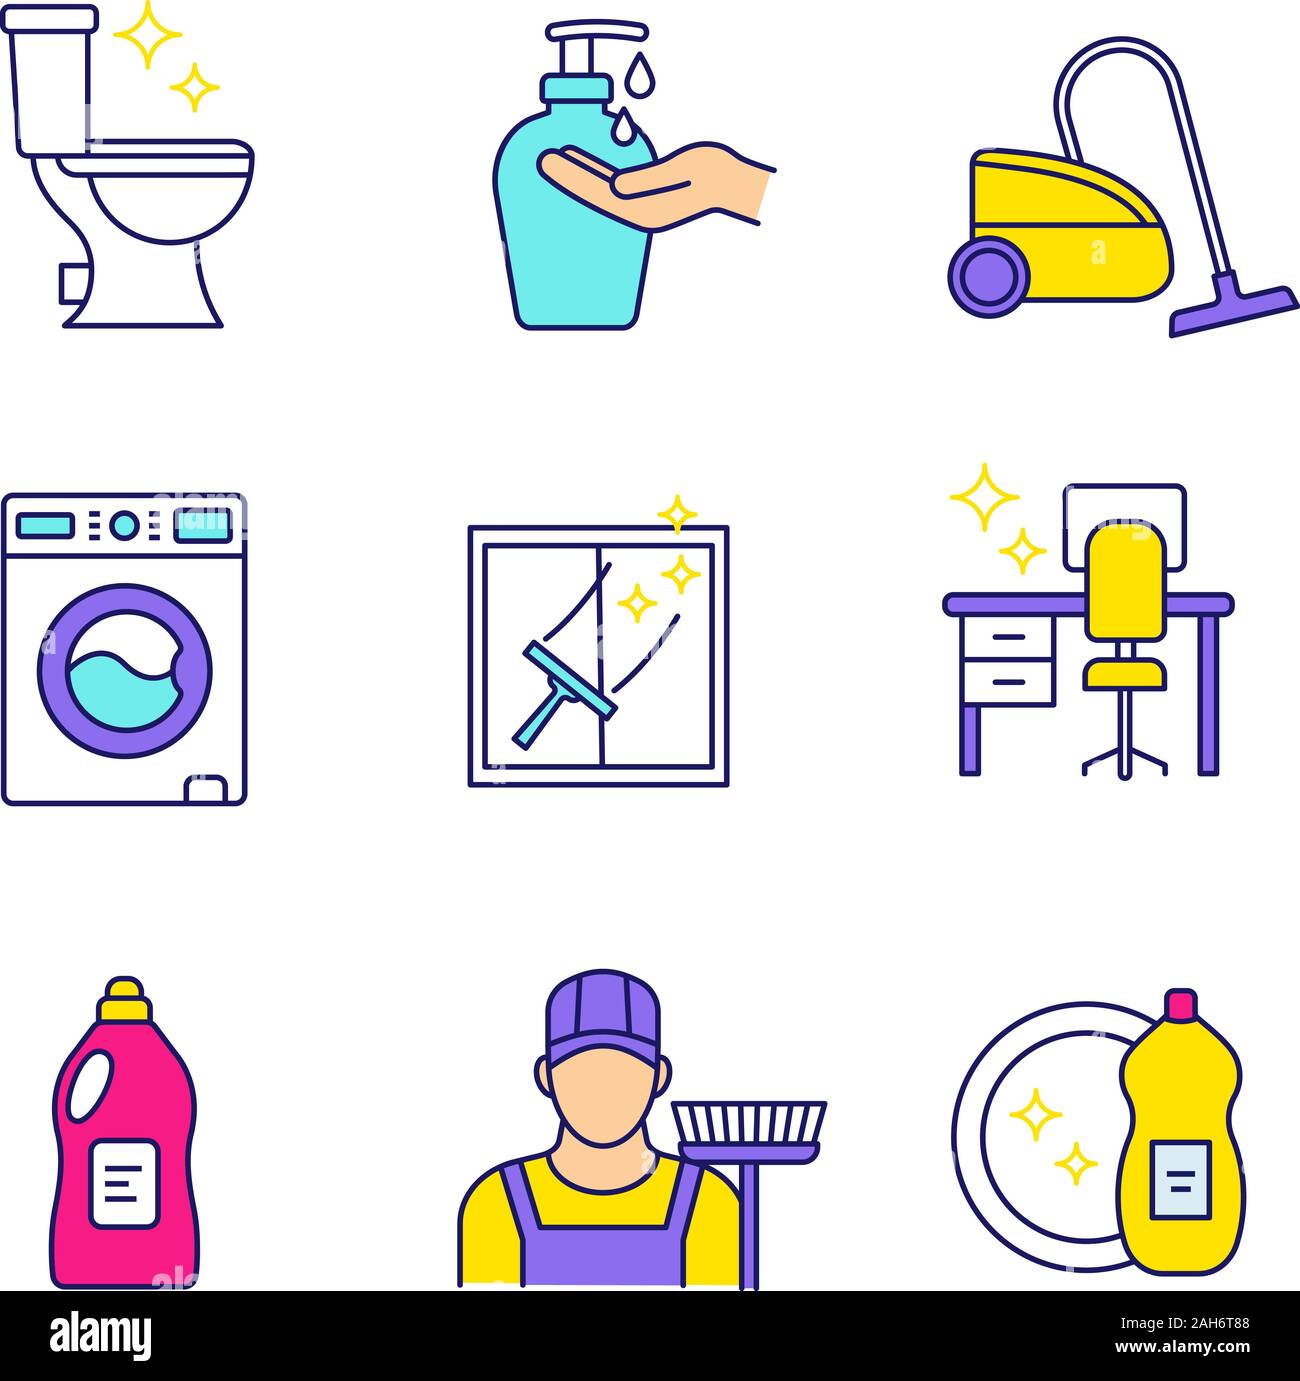 https://c8.alamy.com/comp/2AH6T88/cleaning-service-color-icons-set-liquid-soap-vacuum-cleaner-washing-machine-tidy-table-detergent-sweeper-dishwash-toilet-and-windows-cleaning-2AH6T88.jpg